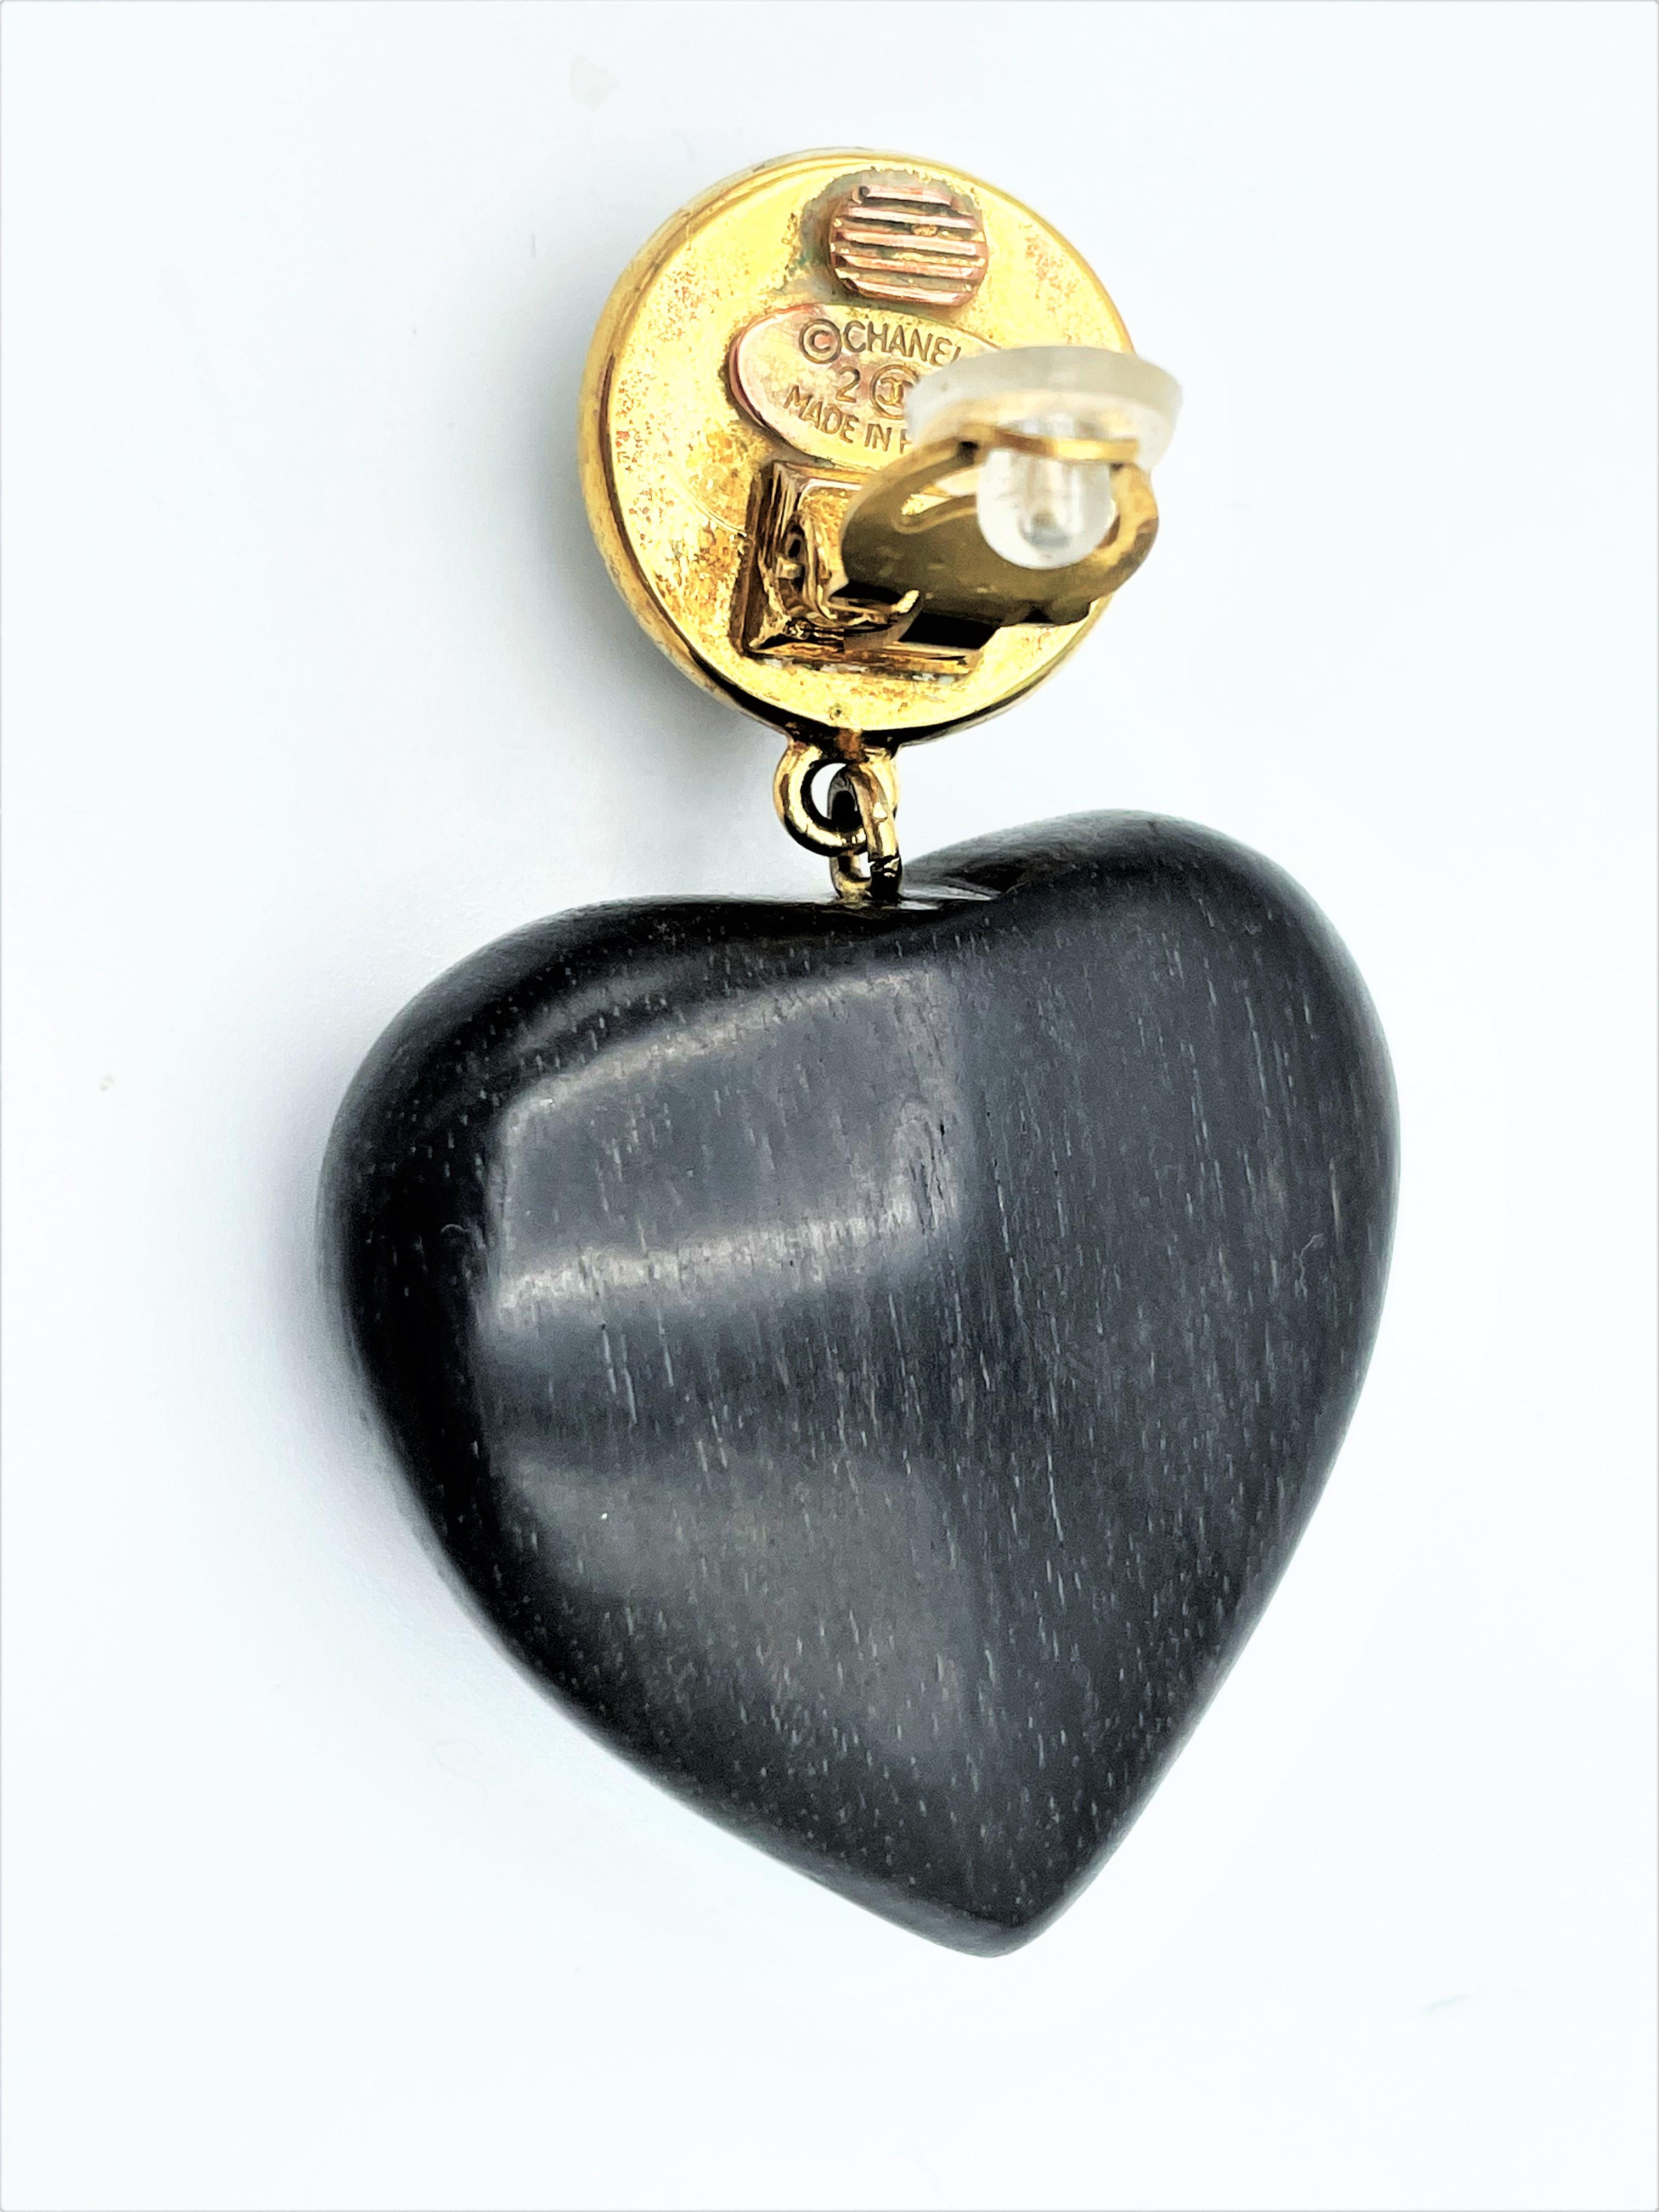 Vintage iconic CCs Chanel heart clip-on earring, made of black ebony sign. 2CC8 2